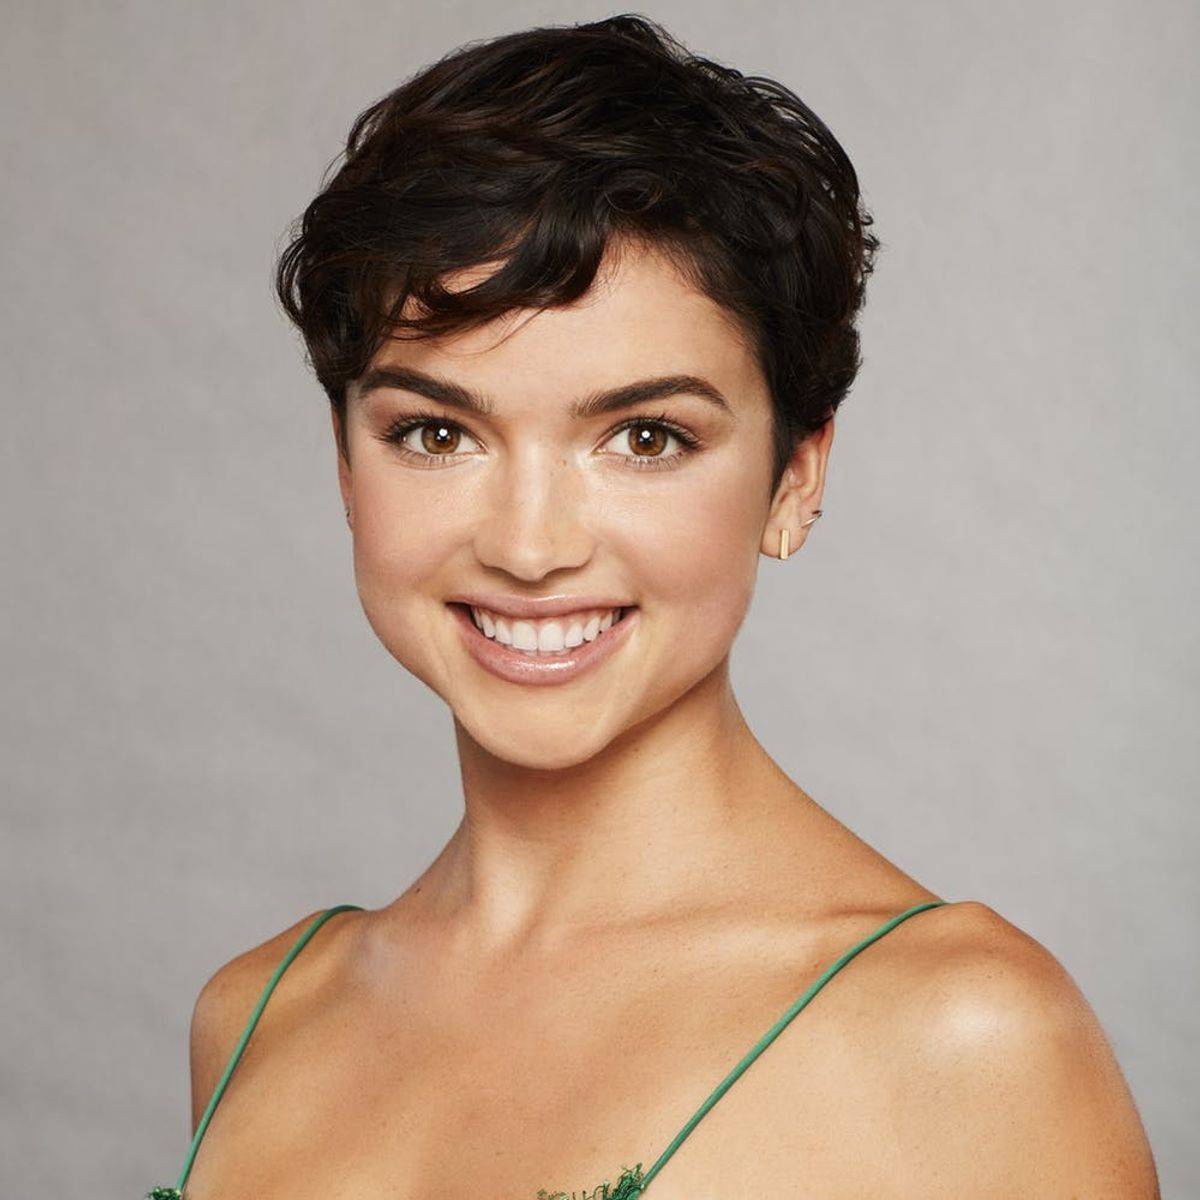 The Bachelor’s Bekah M. Responds to People Who Have an Issue With Her Age